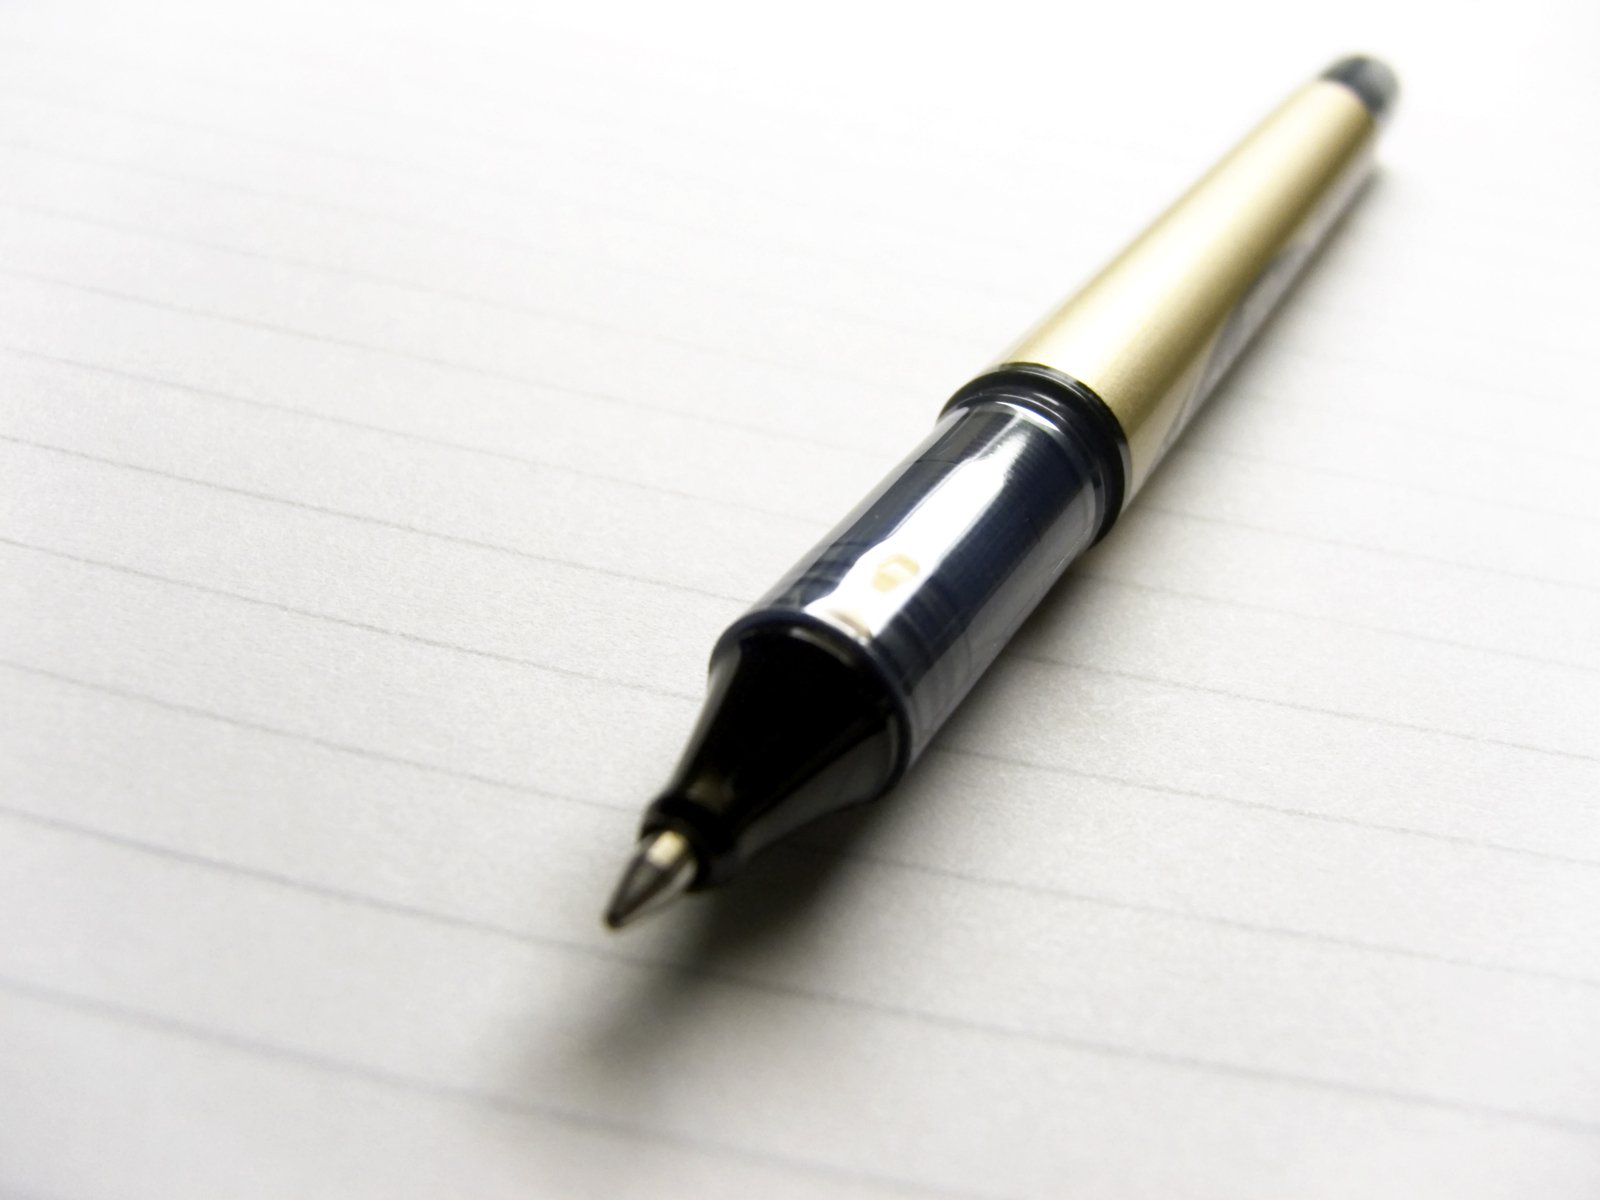 a fountain pen is resting on top of a lined notebook